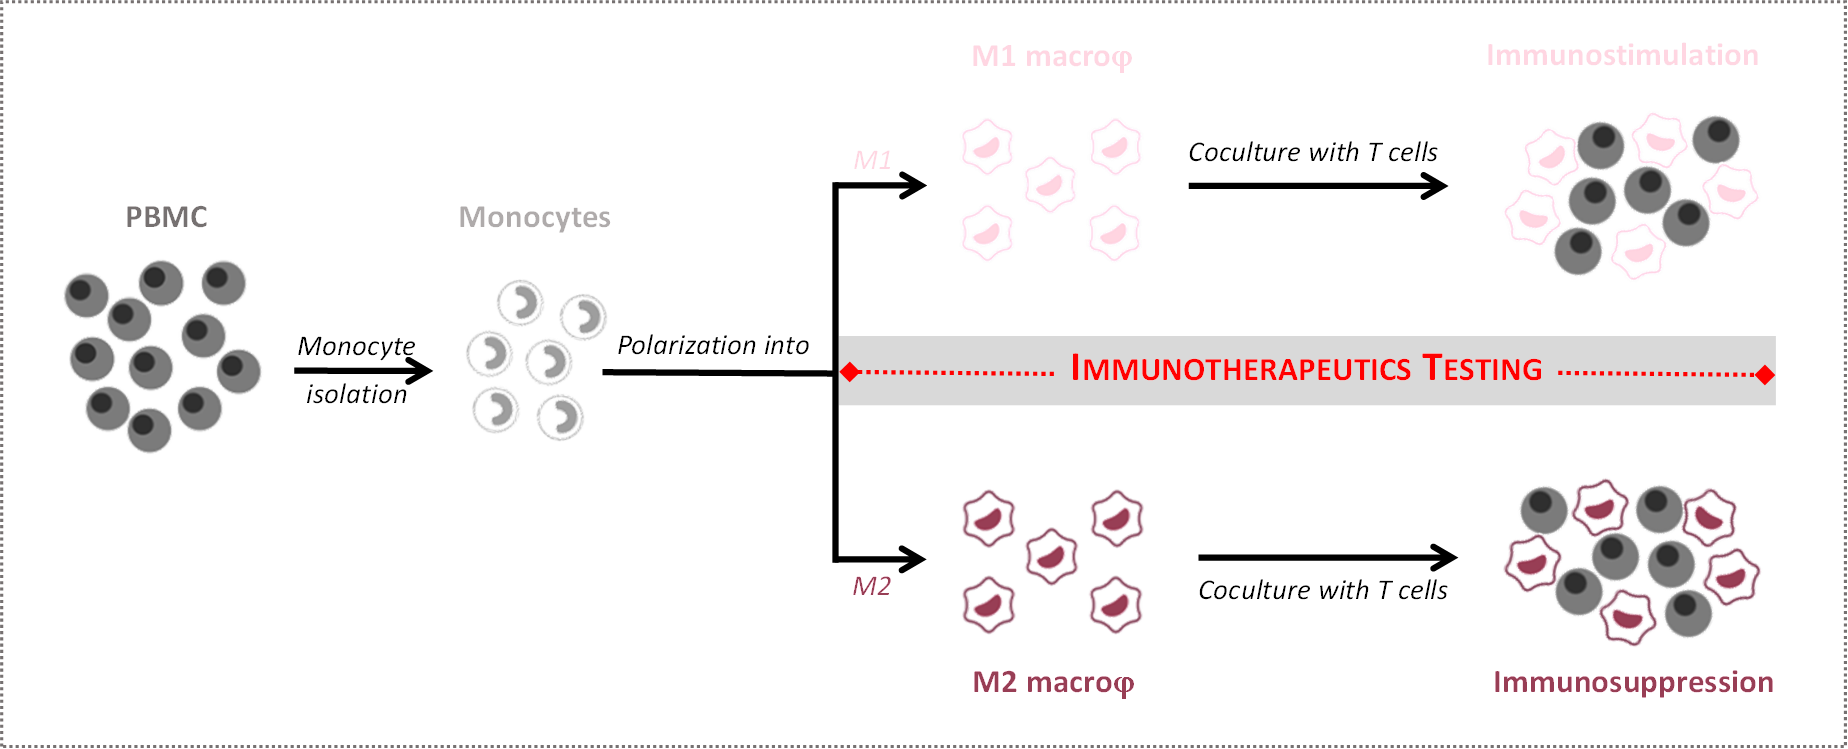 Macrophage-based assays to assess immunotherapeutics on macrophage functions and mediated immune response